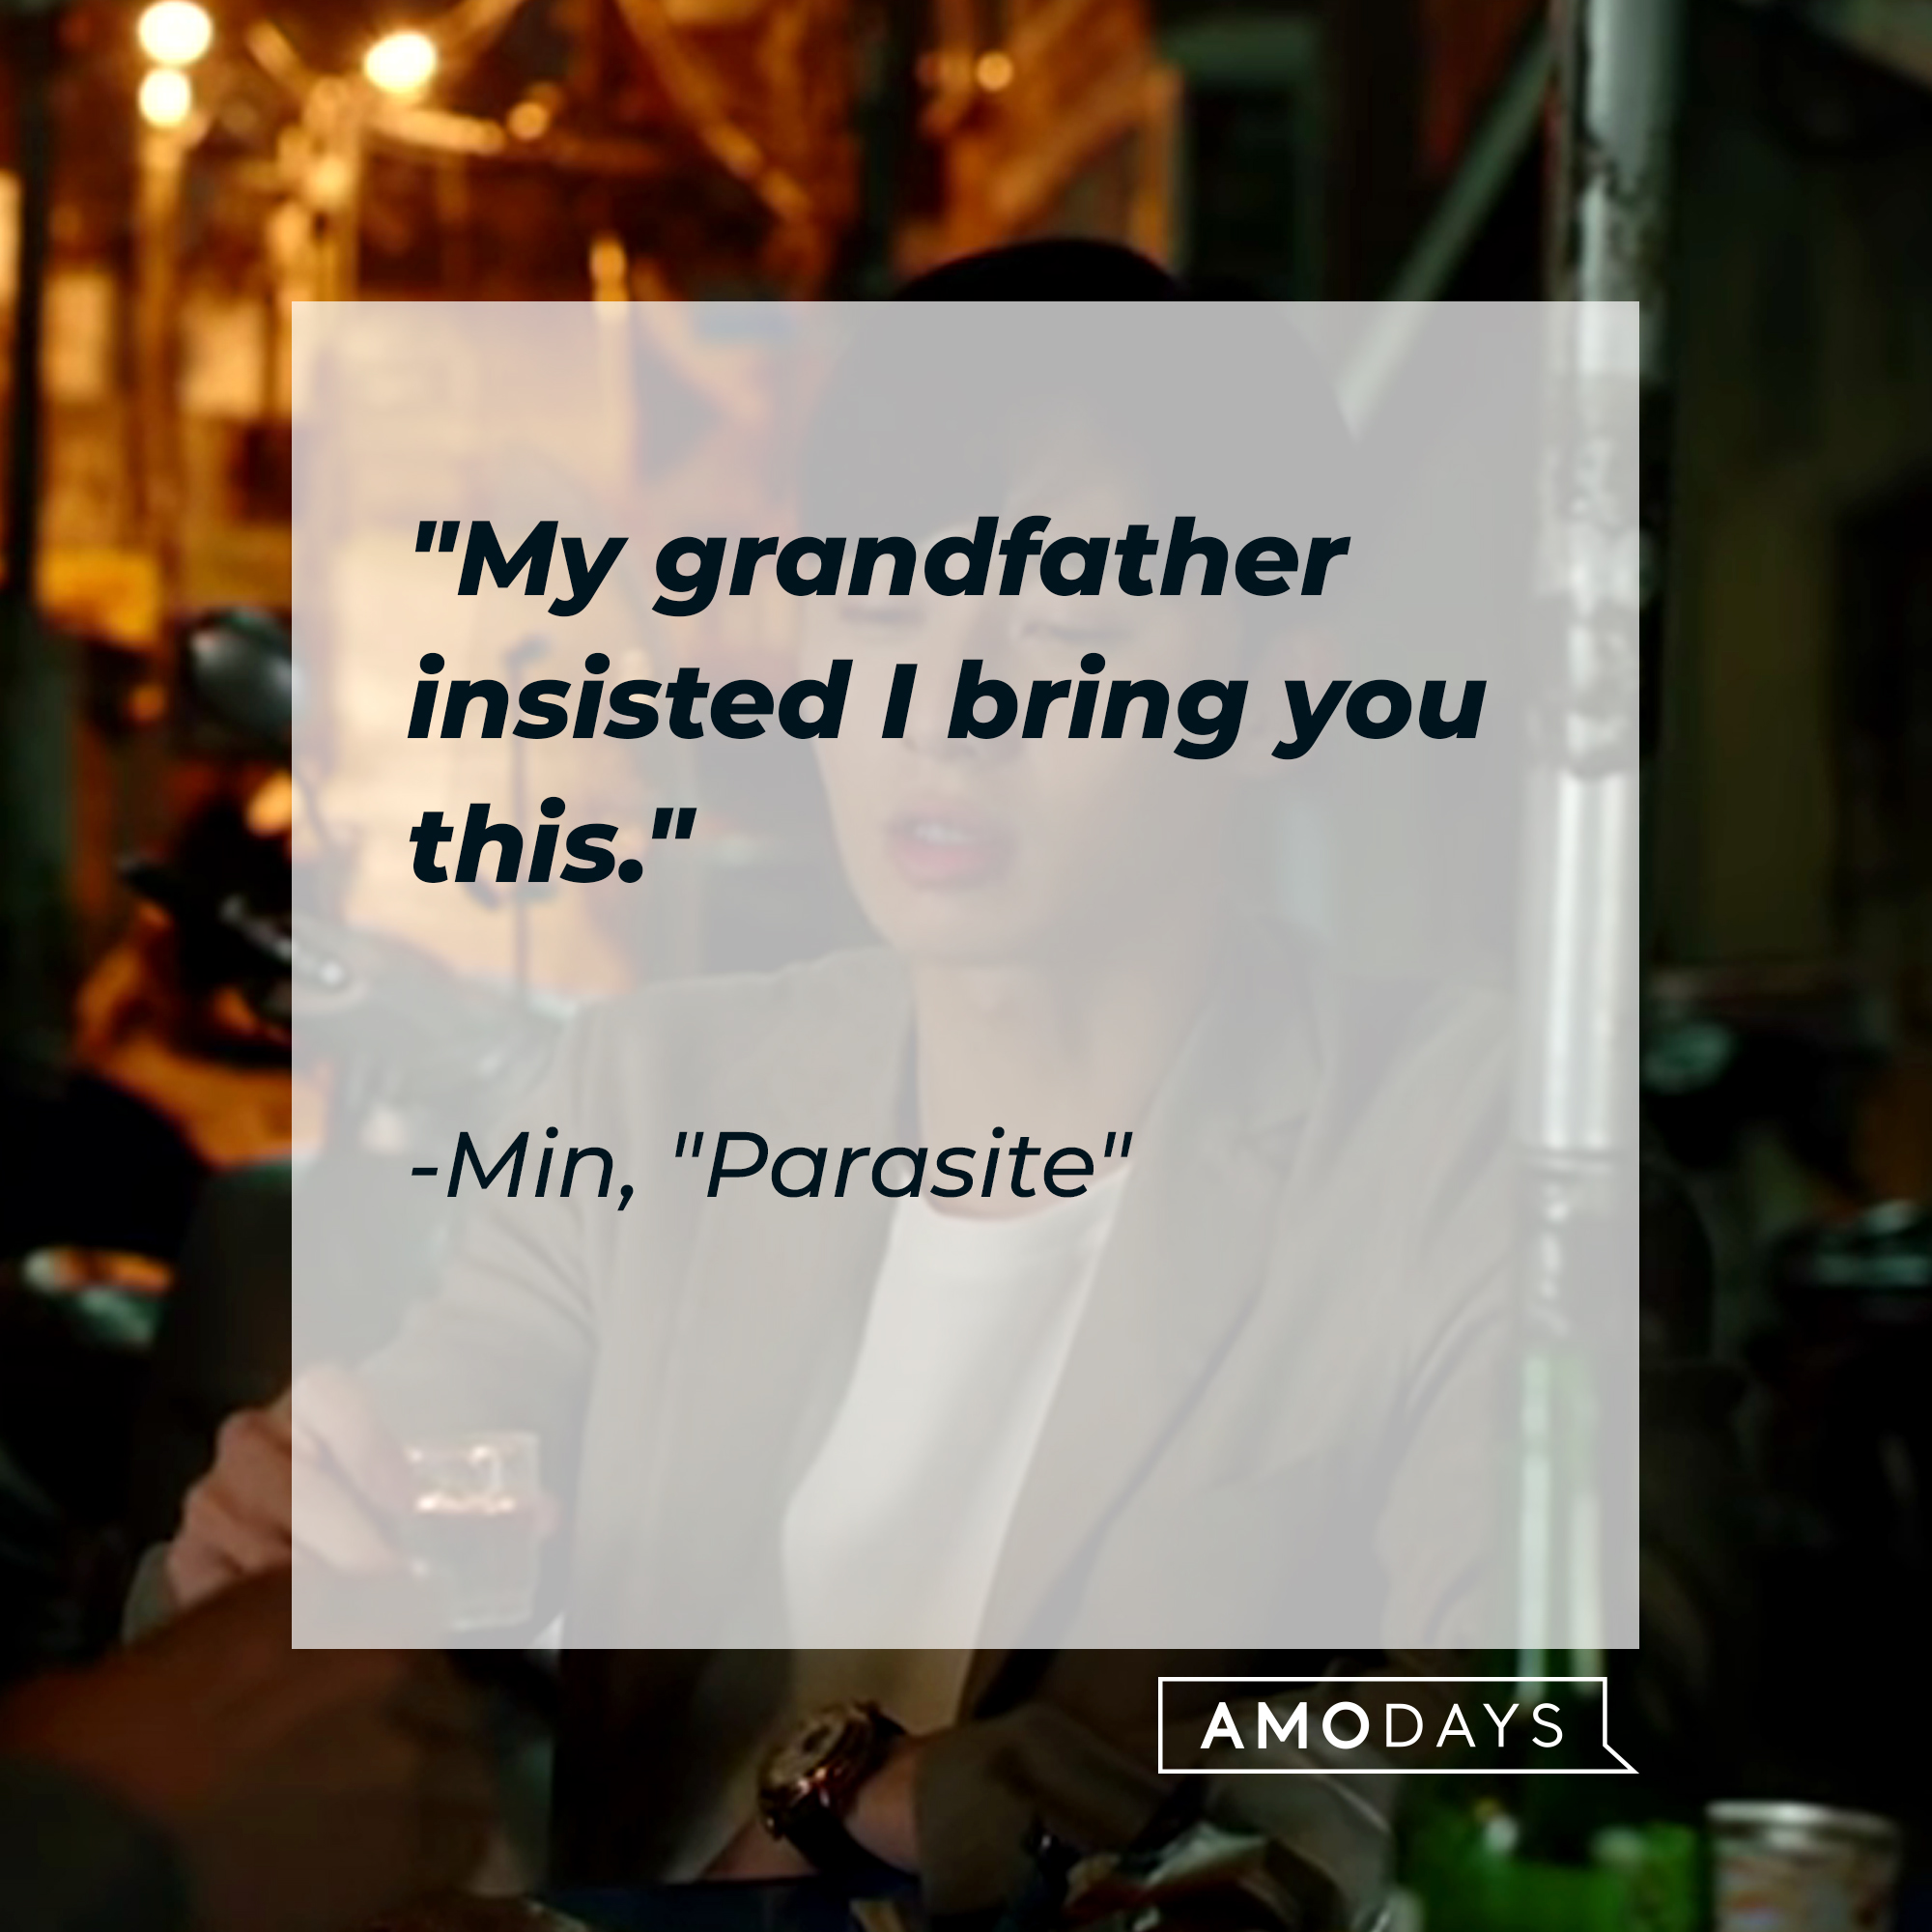 Min with his quote: "My grandfather insisted I bring you this." | Source: Facebook.com/ParasiteMovie